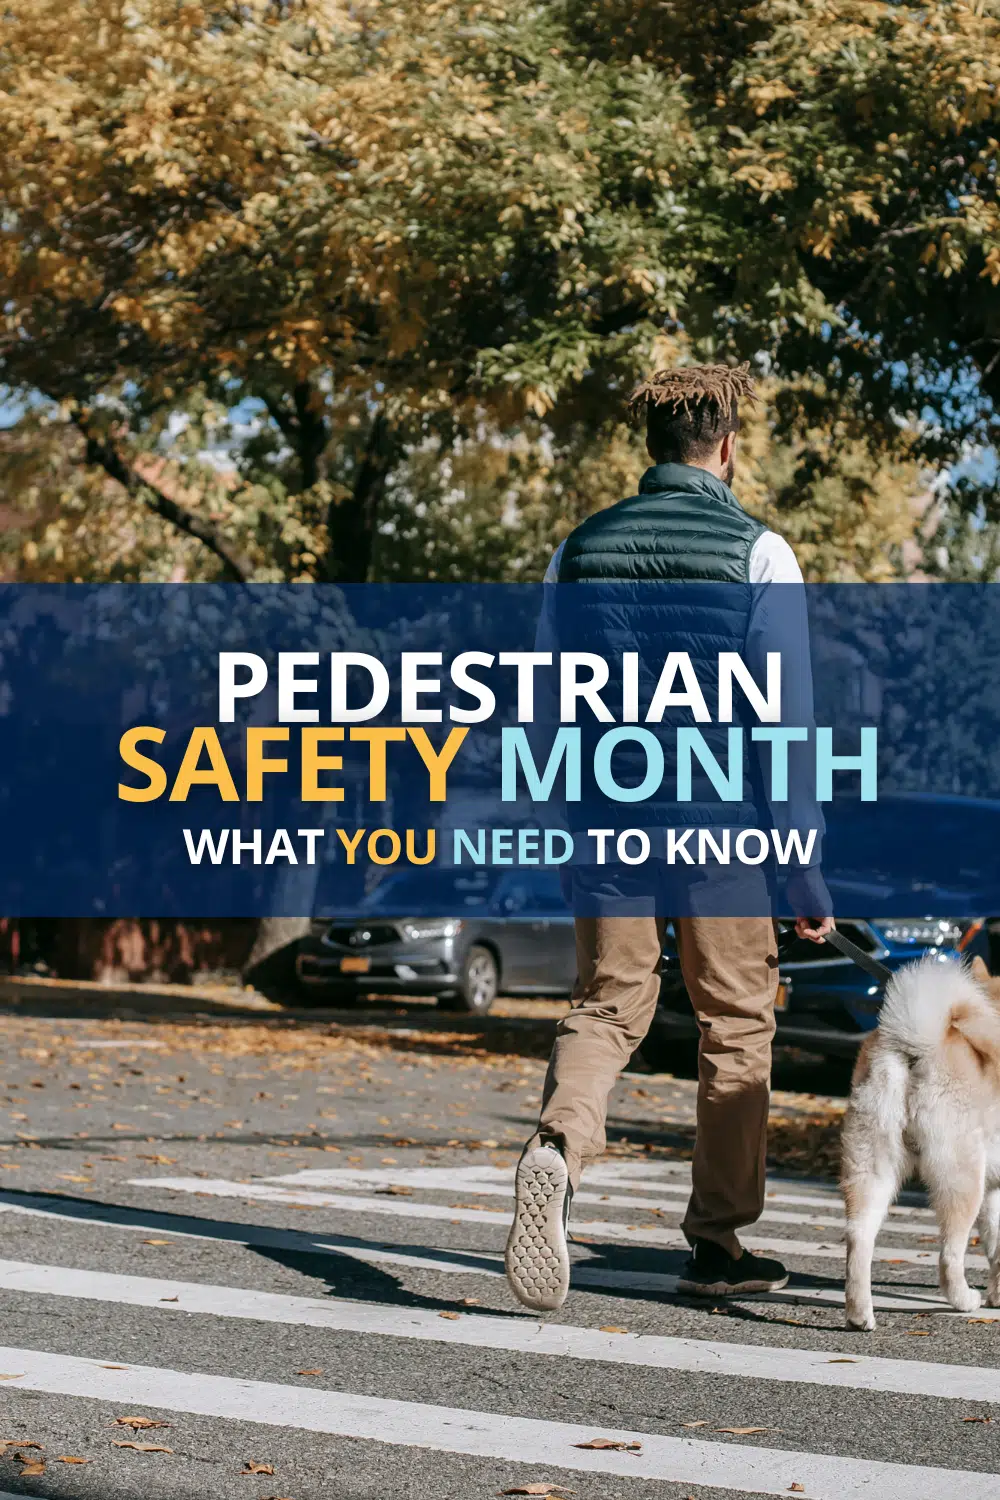 Pedestrian Safety Month October 2022: What You Need To Know